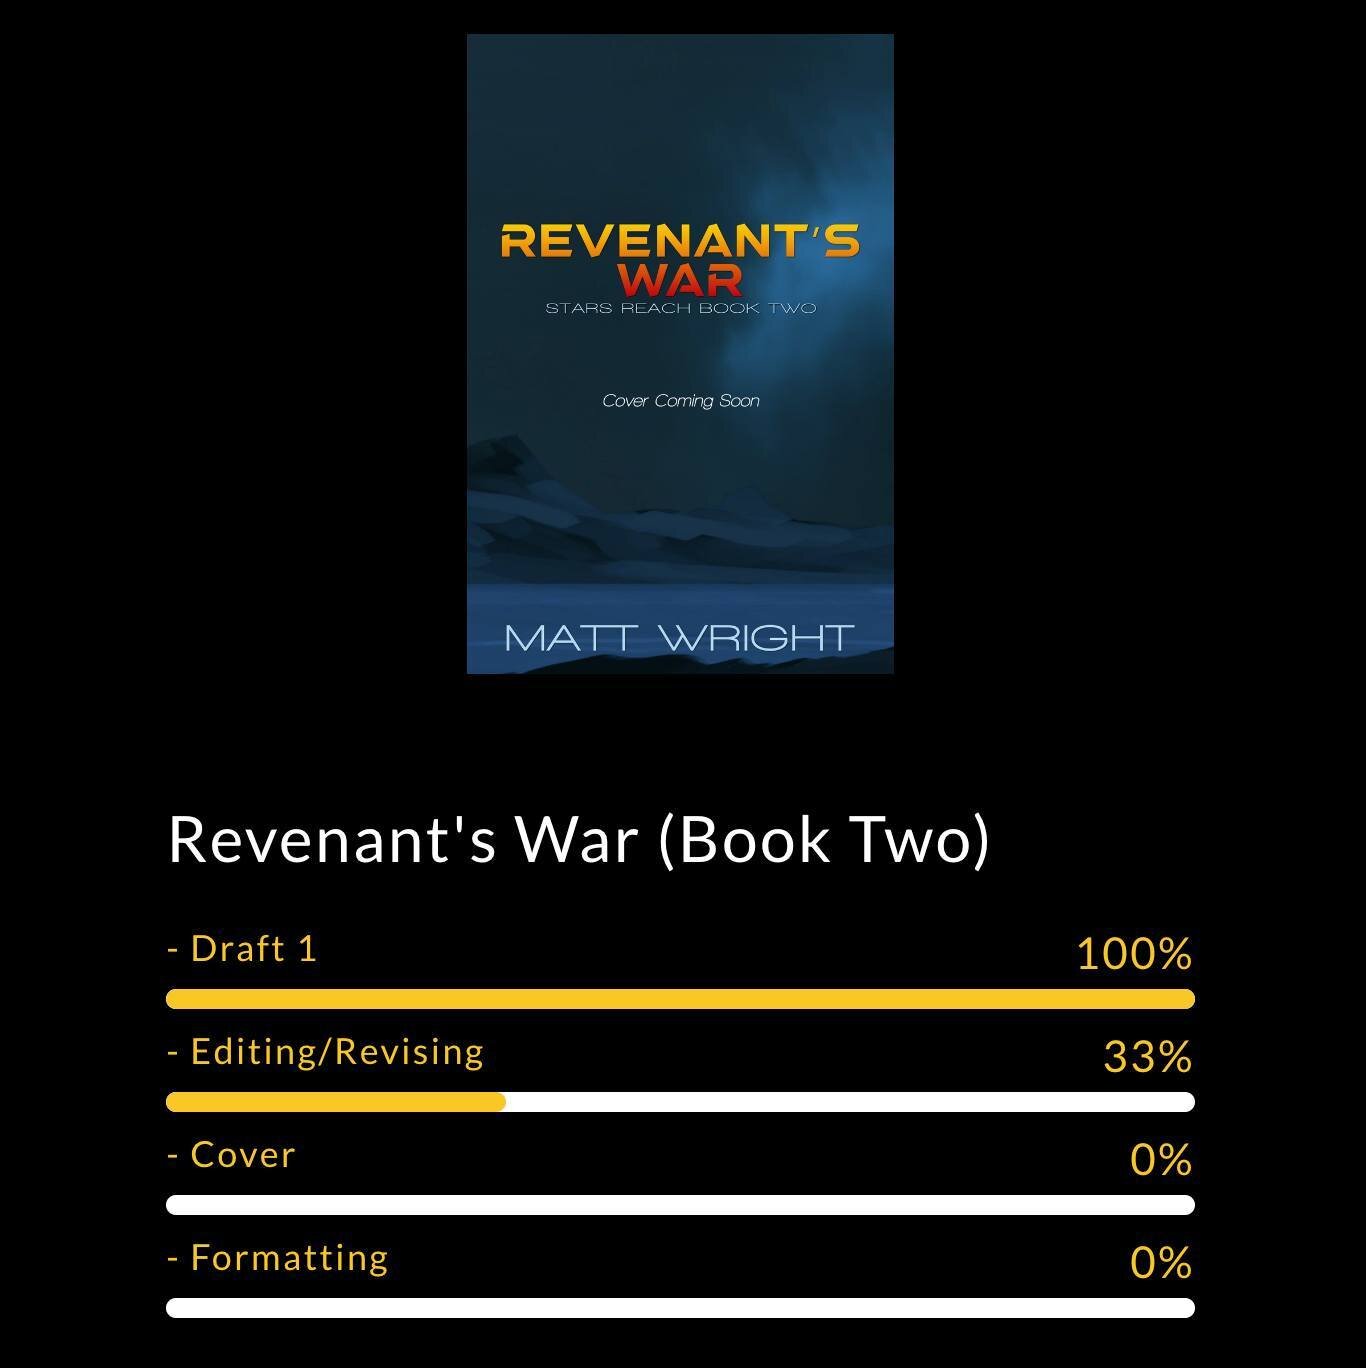 I couldn't sleep so I made some more progress on #RevenantsWar and I guess it makes insomnia somewhat tolerable. Pity I can't have the same motivation during the day.